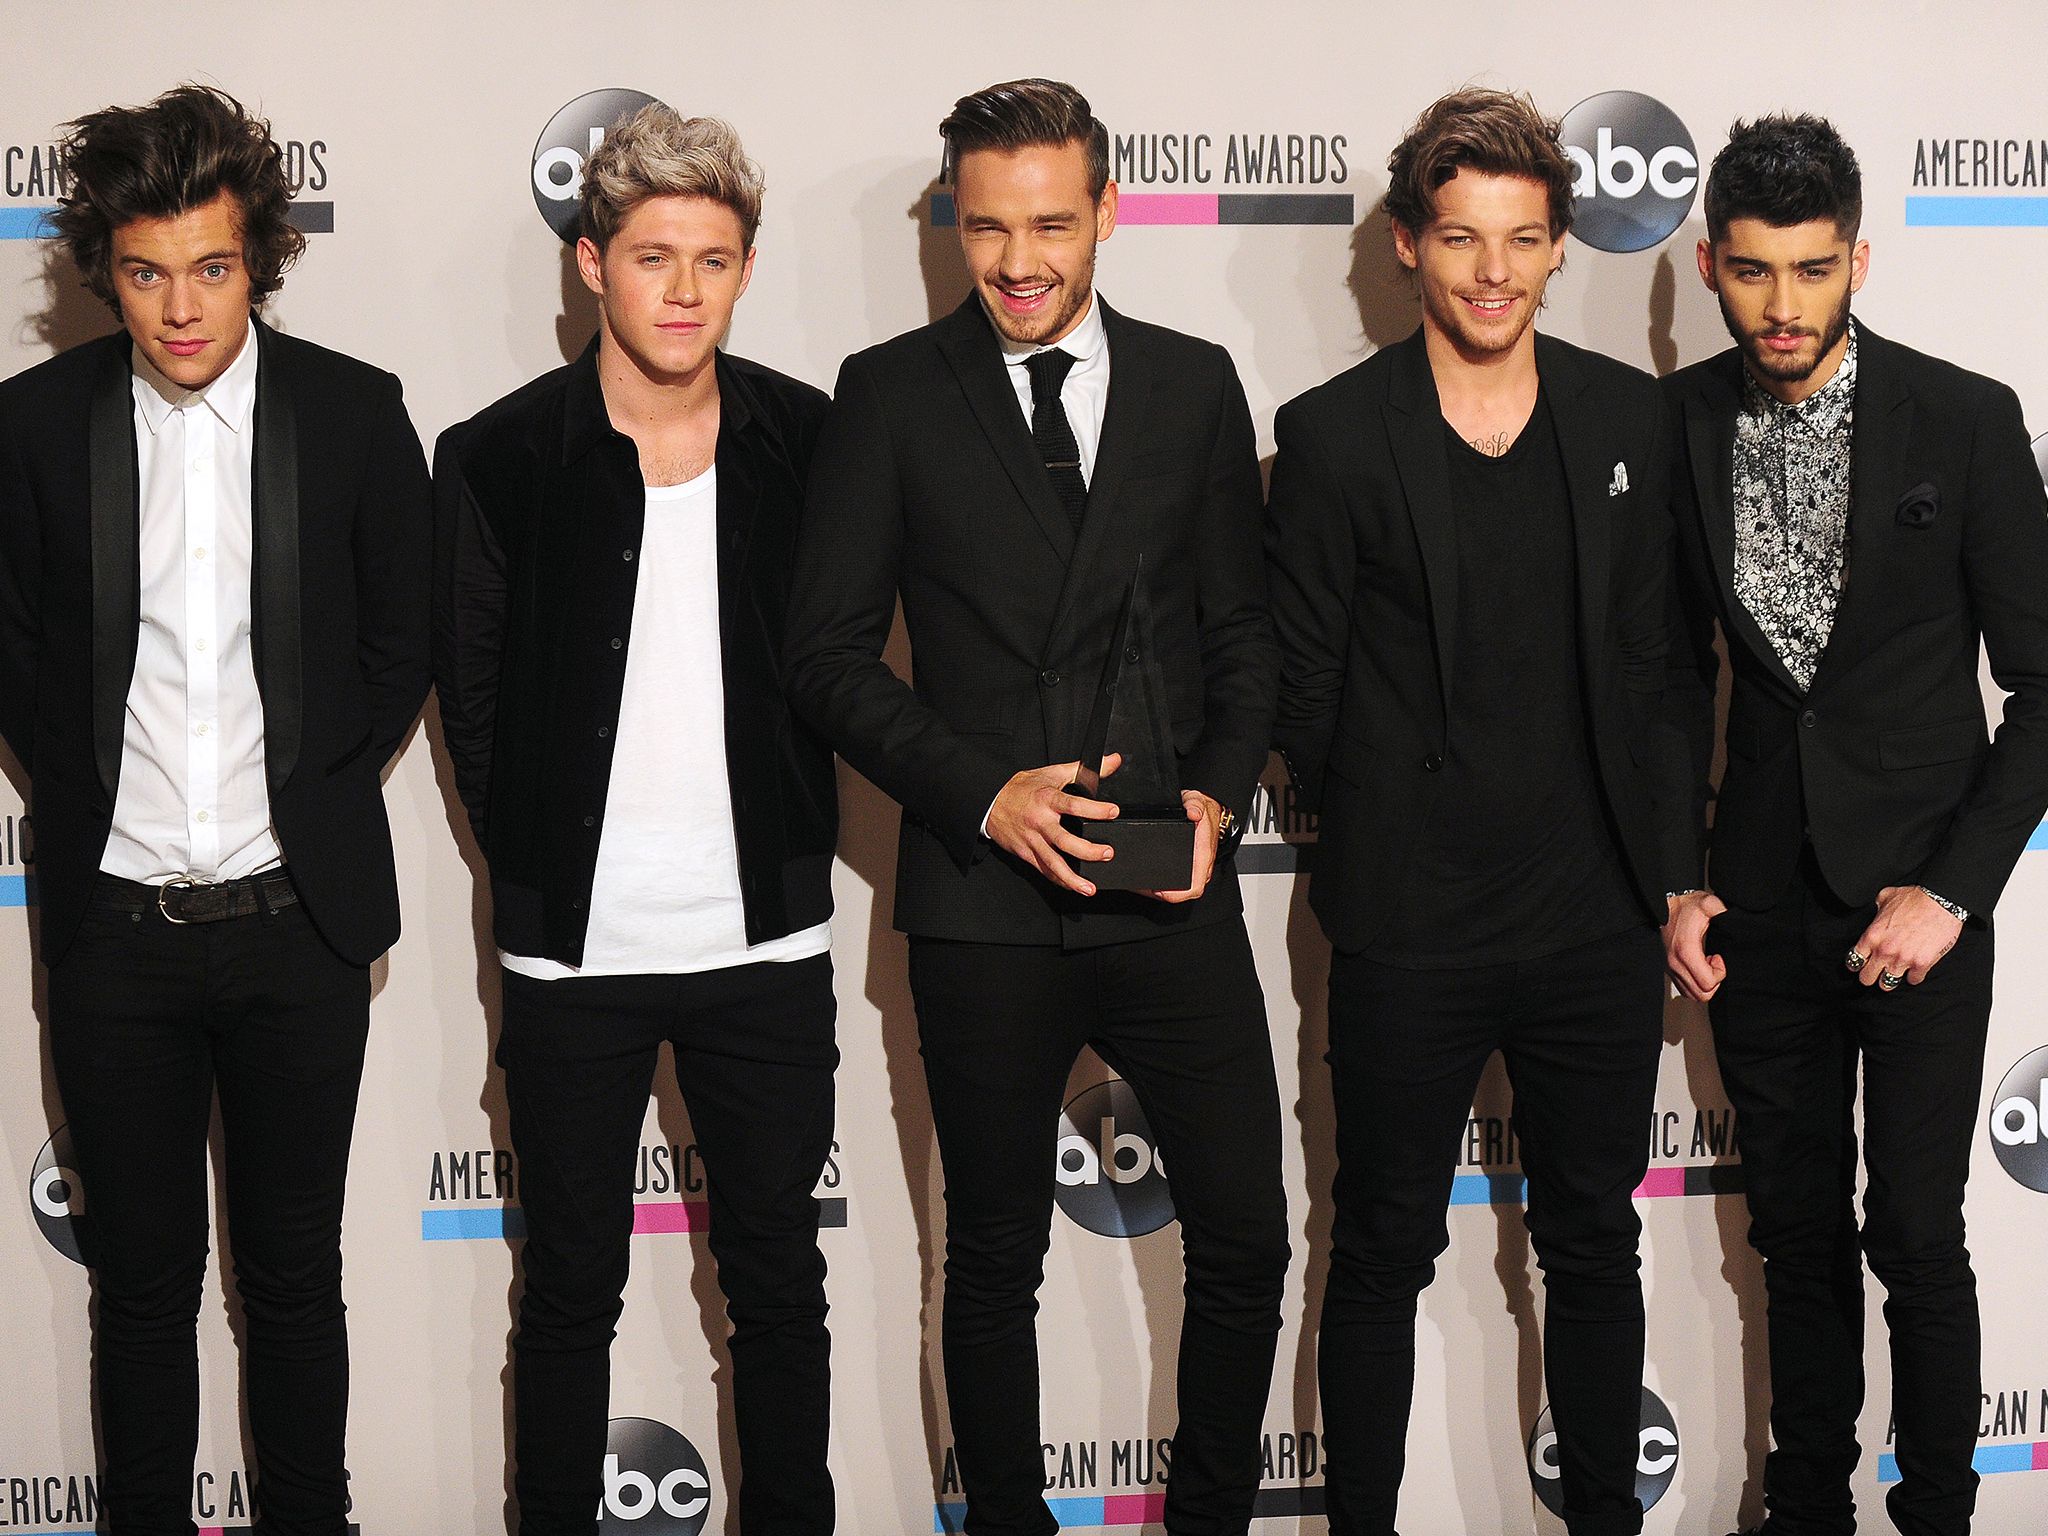 One Direction hit the red carpet at the American Music Awards. - One Direction